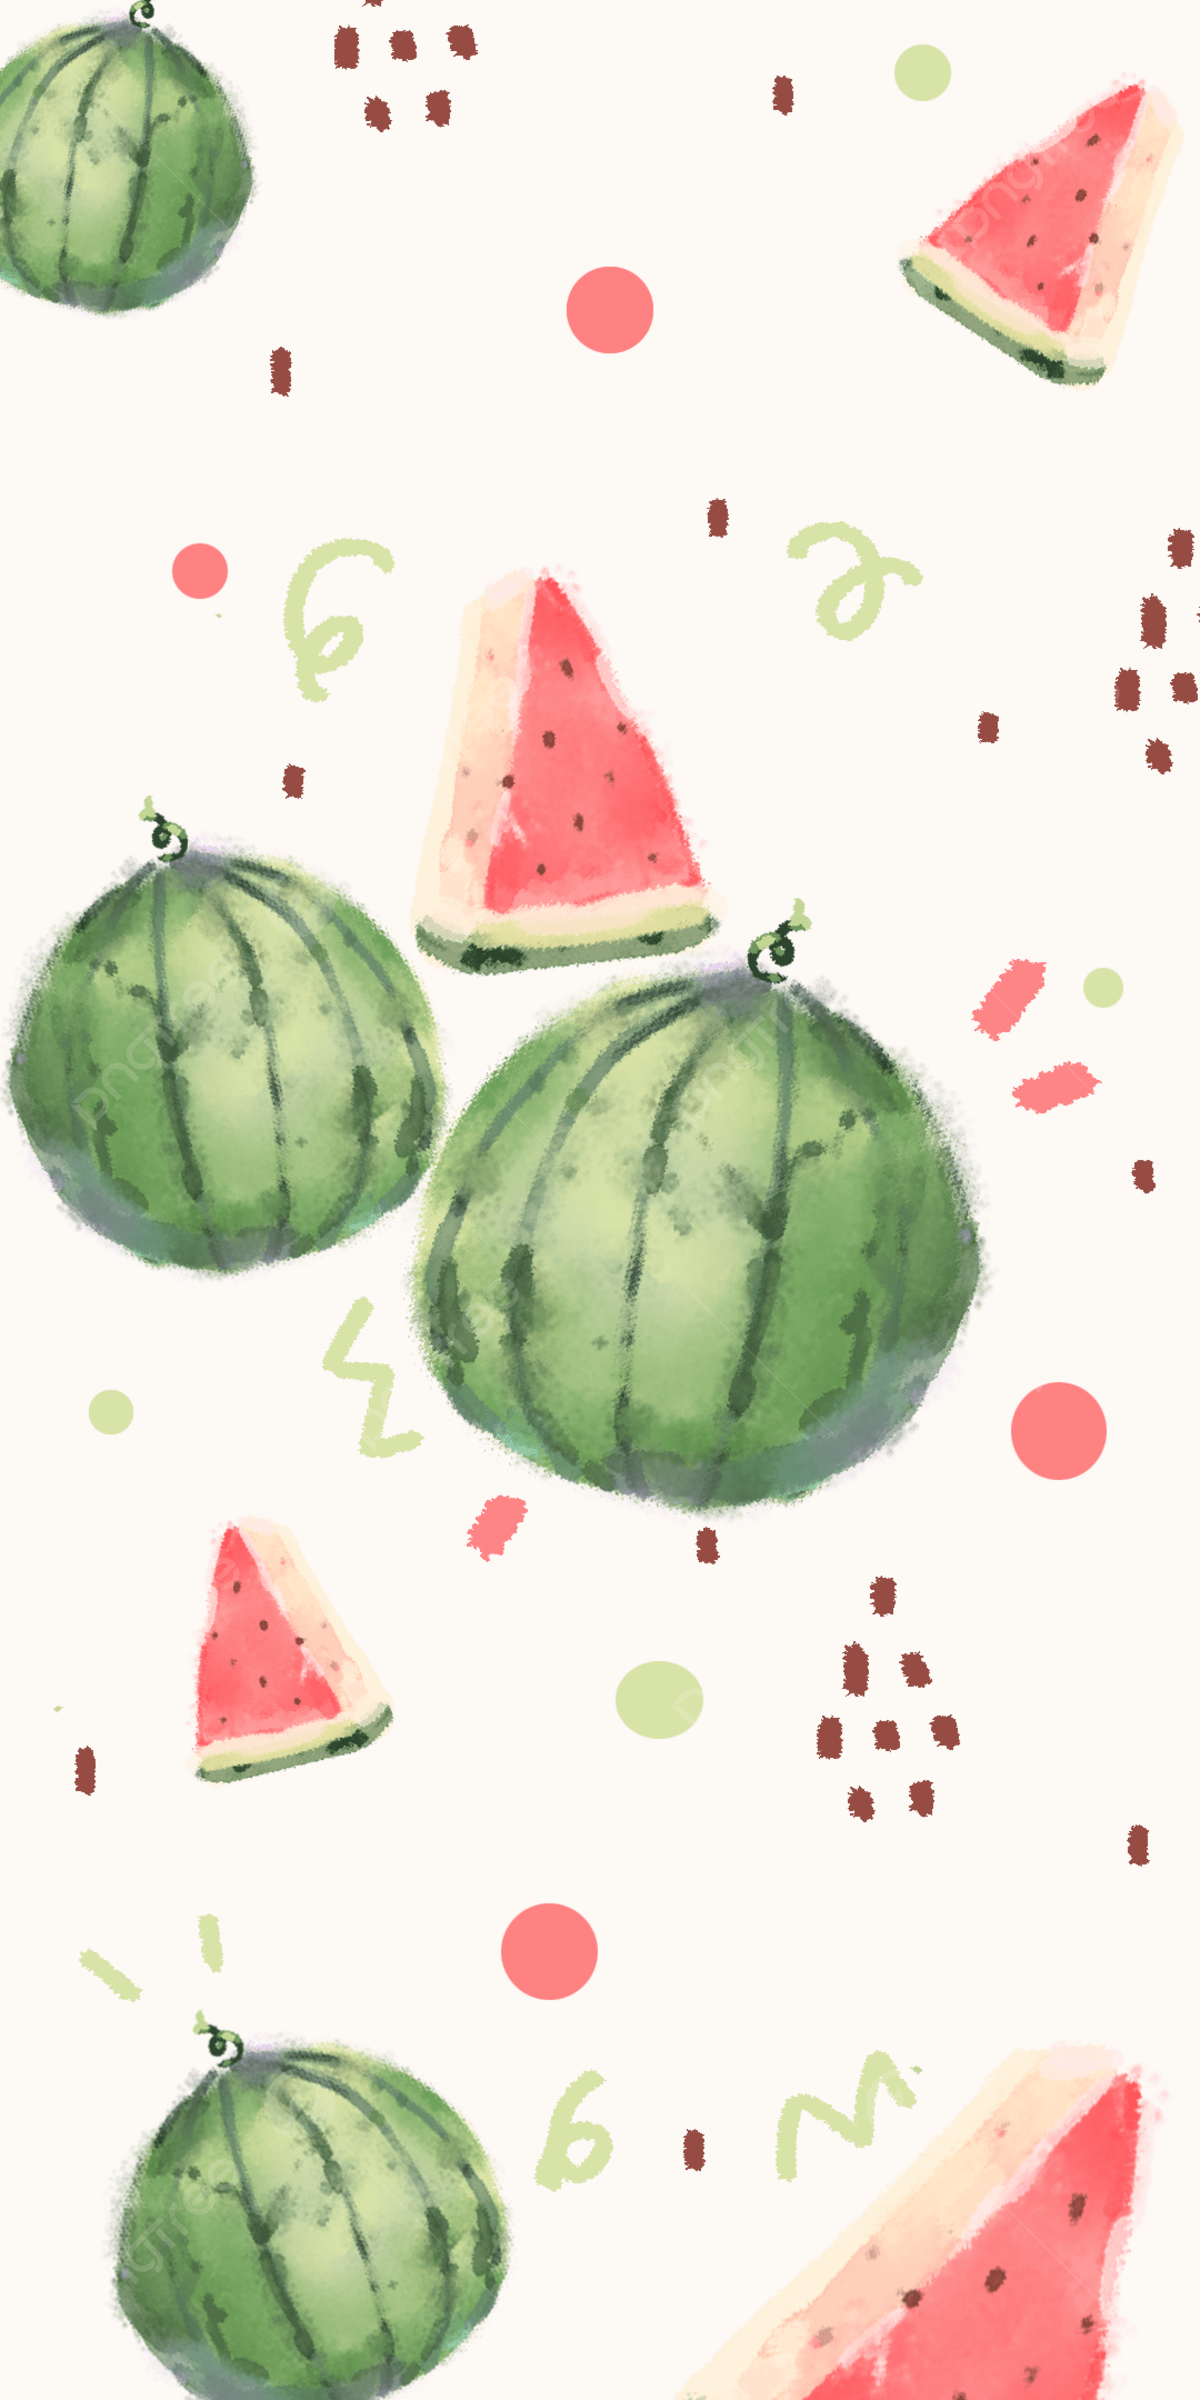 A pattern of watermelon slices on white background - Watermelon